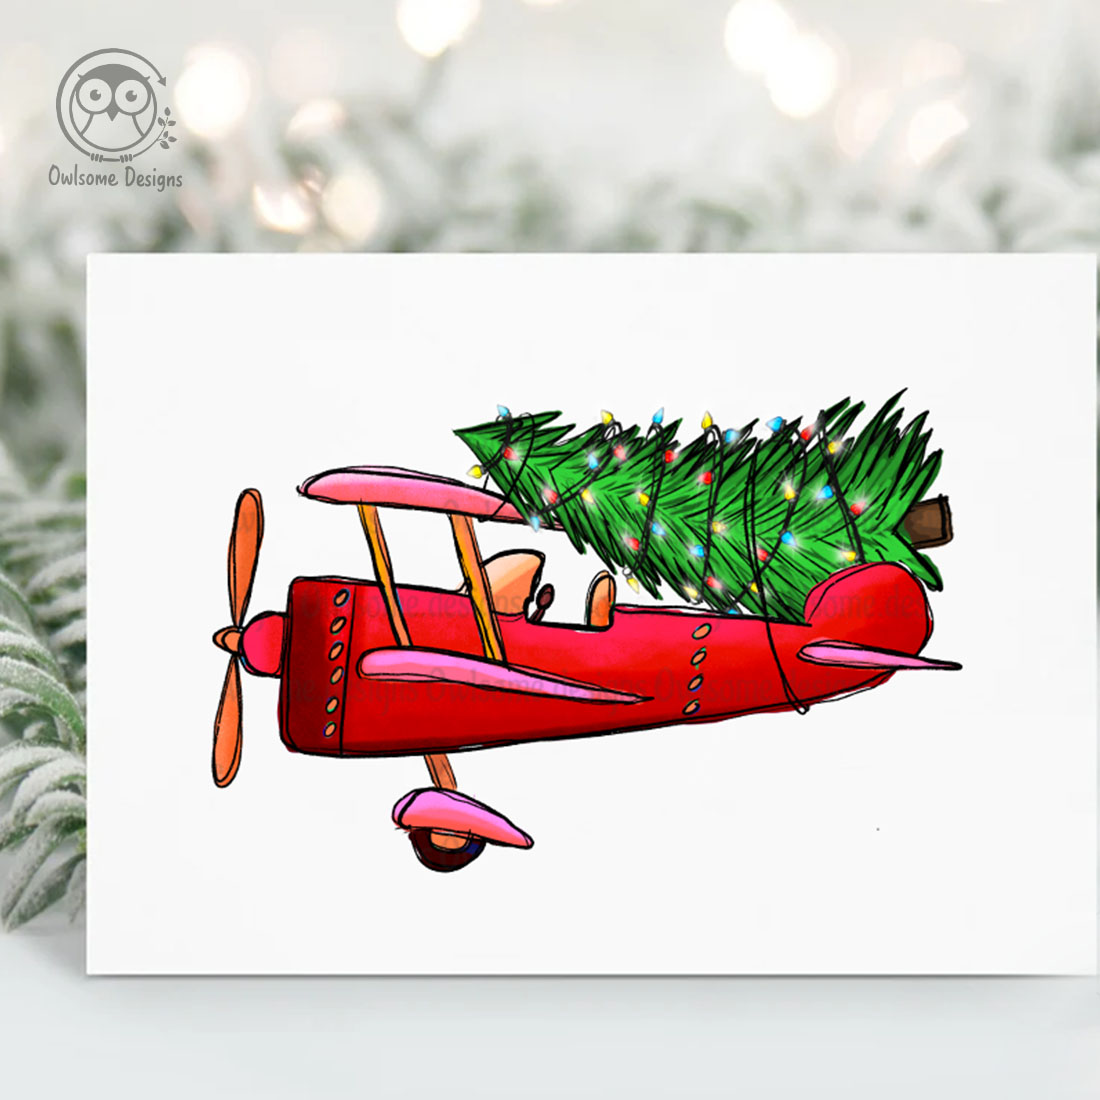 Plane Christmas Tree created by mingying337.